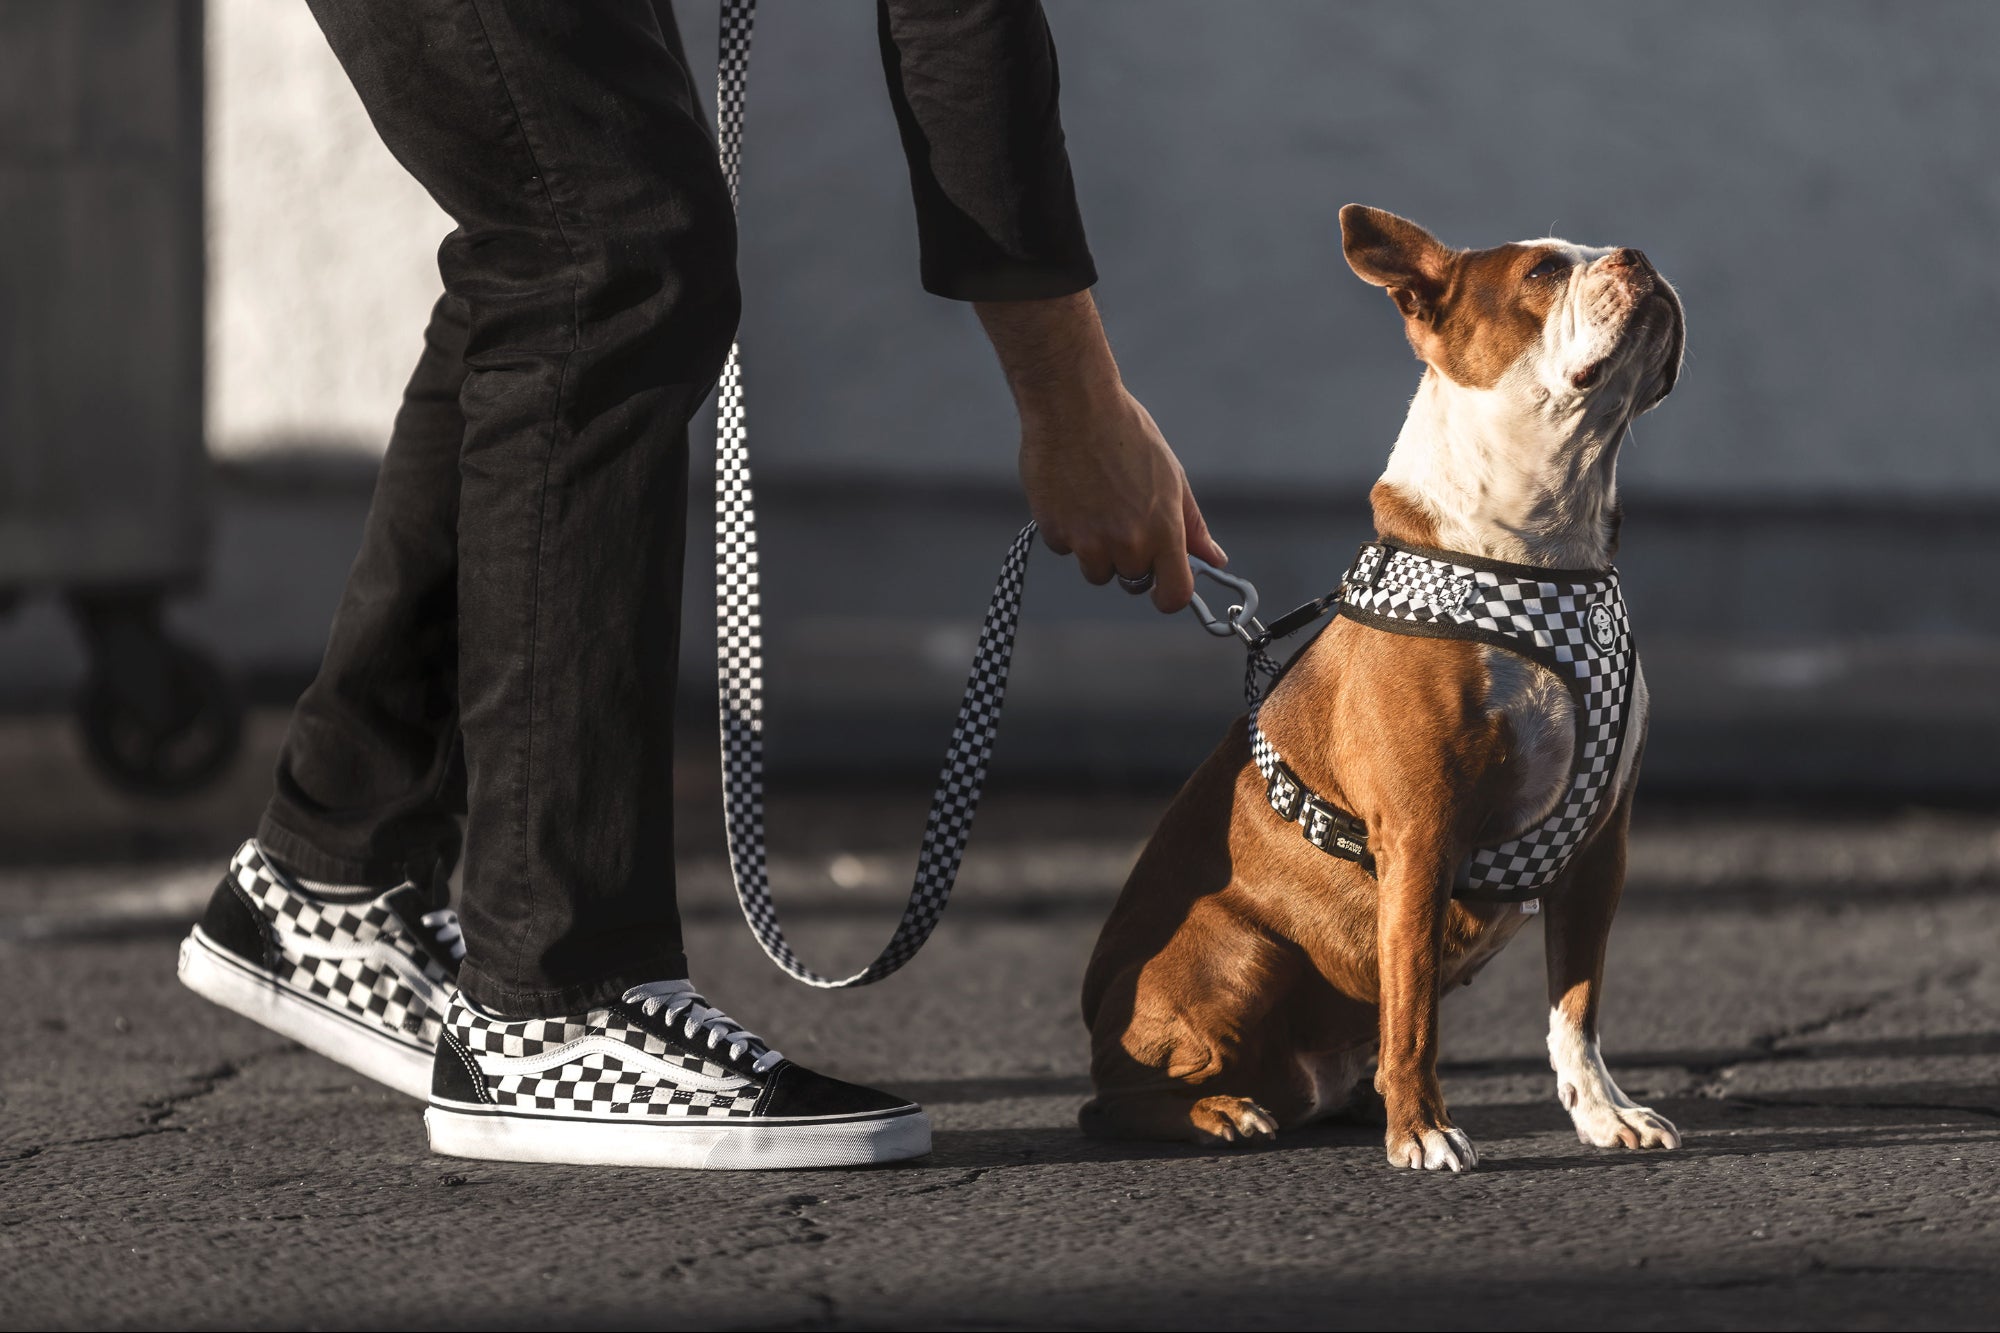 Streetwear Culture Goes to the Dogs